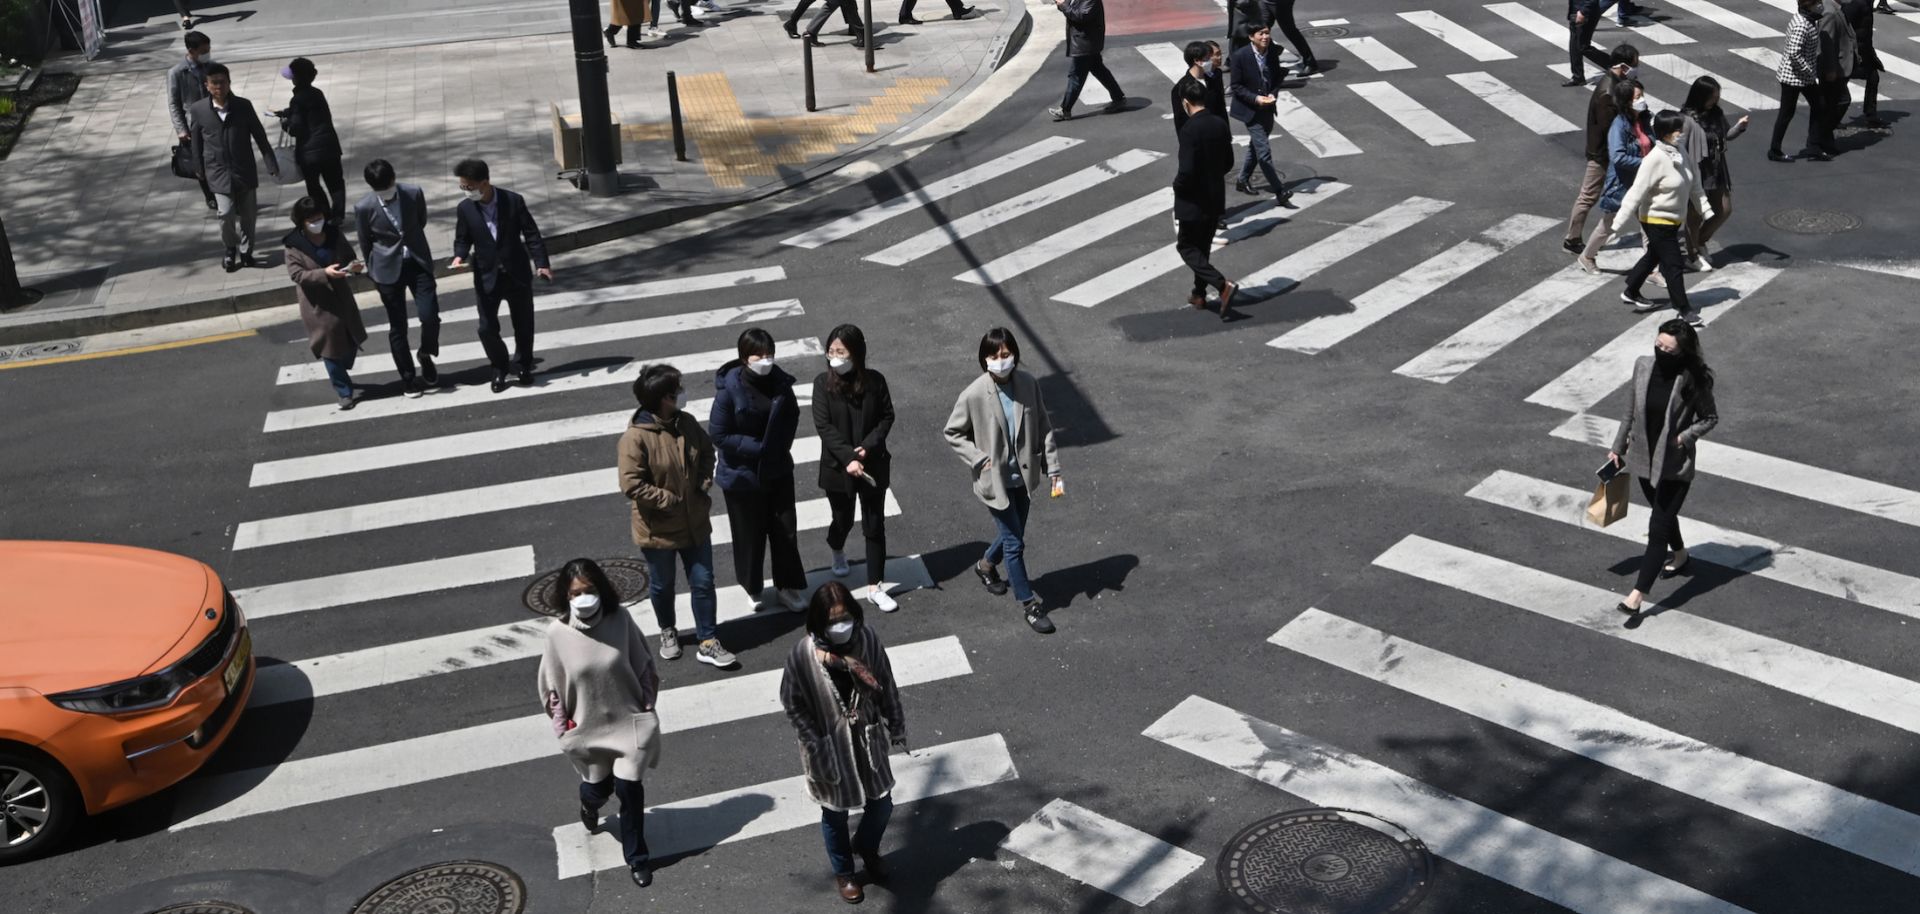 Pedestrians wearing face masks cross an intersection in Seoul, South Korea, on April 23, 2020. In the first quarter of 2020, South Korea's economy saw its worst performance in more than a decade as COVID-19 spread across the country. 